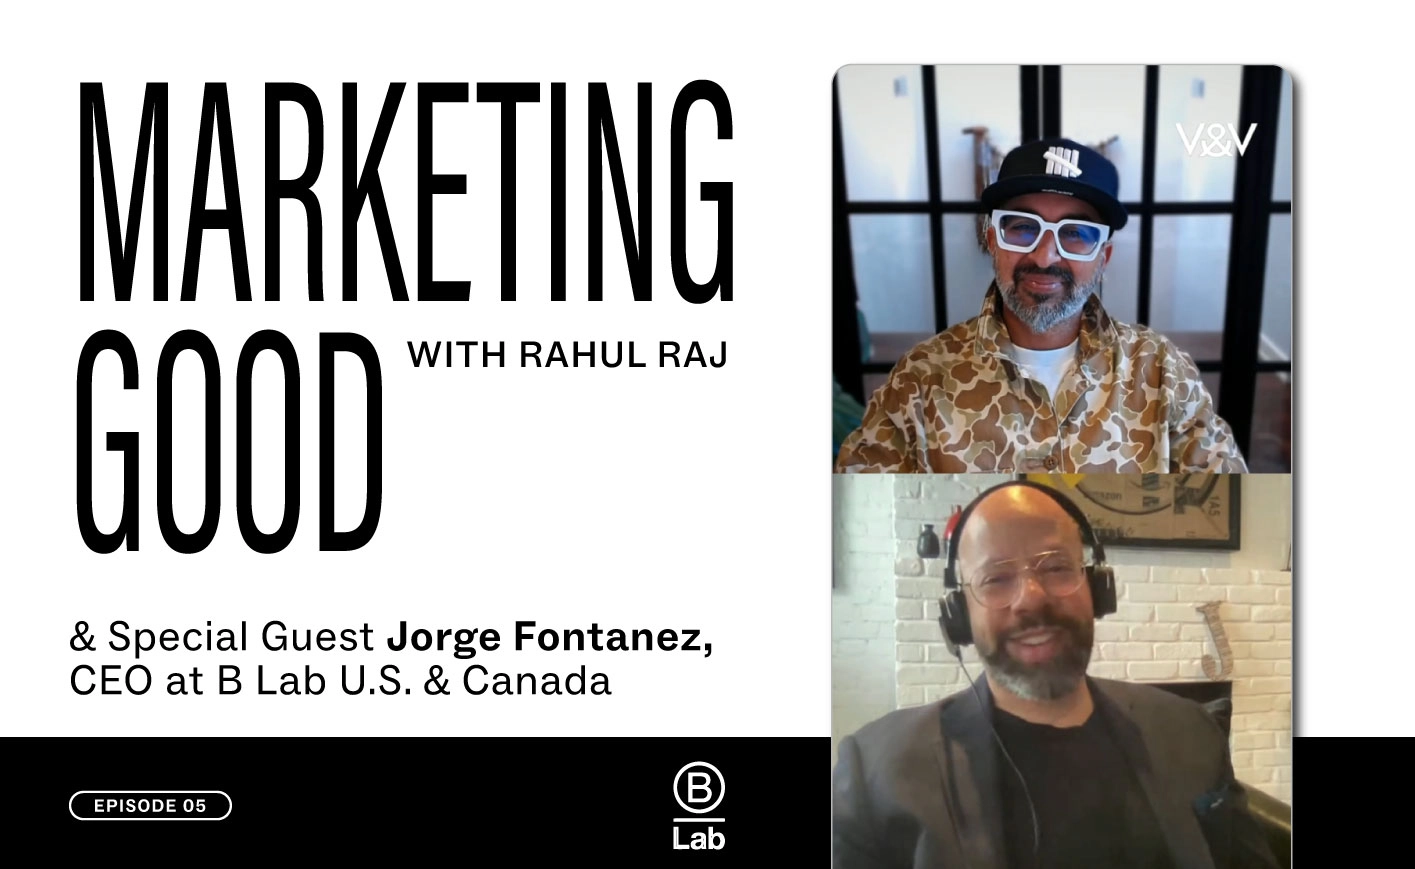 Marketing Good with Rahul Raj and a special guest Jorge Fontanez, CEO at B Lab U.S. & Canada